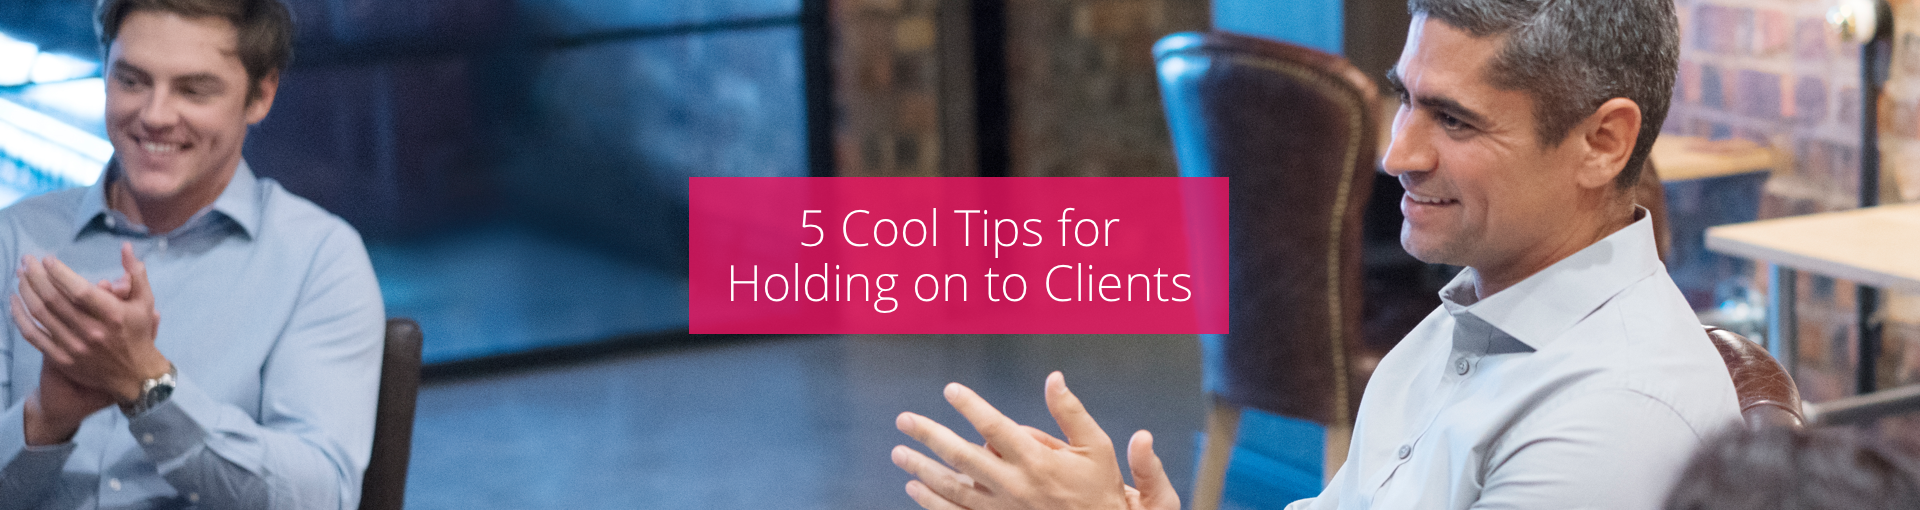 5 Cool Tips for Holding on to Clients Featured Image